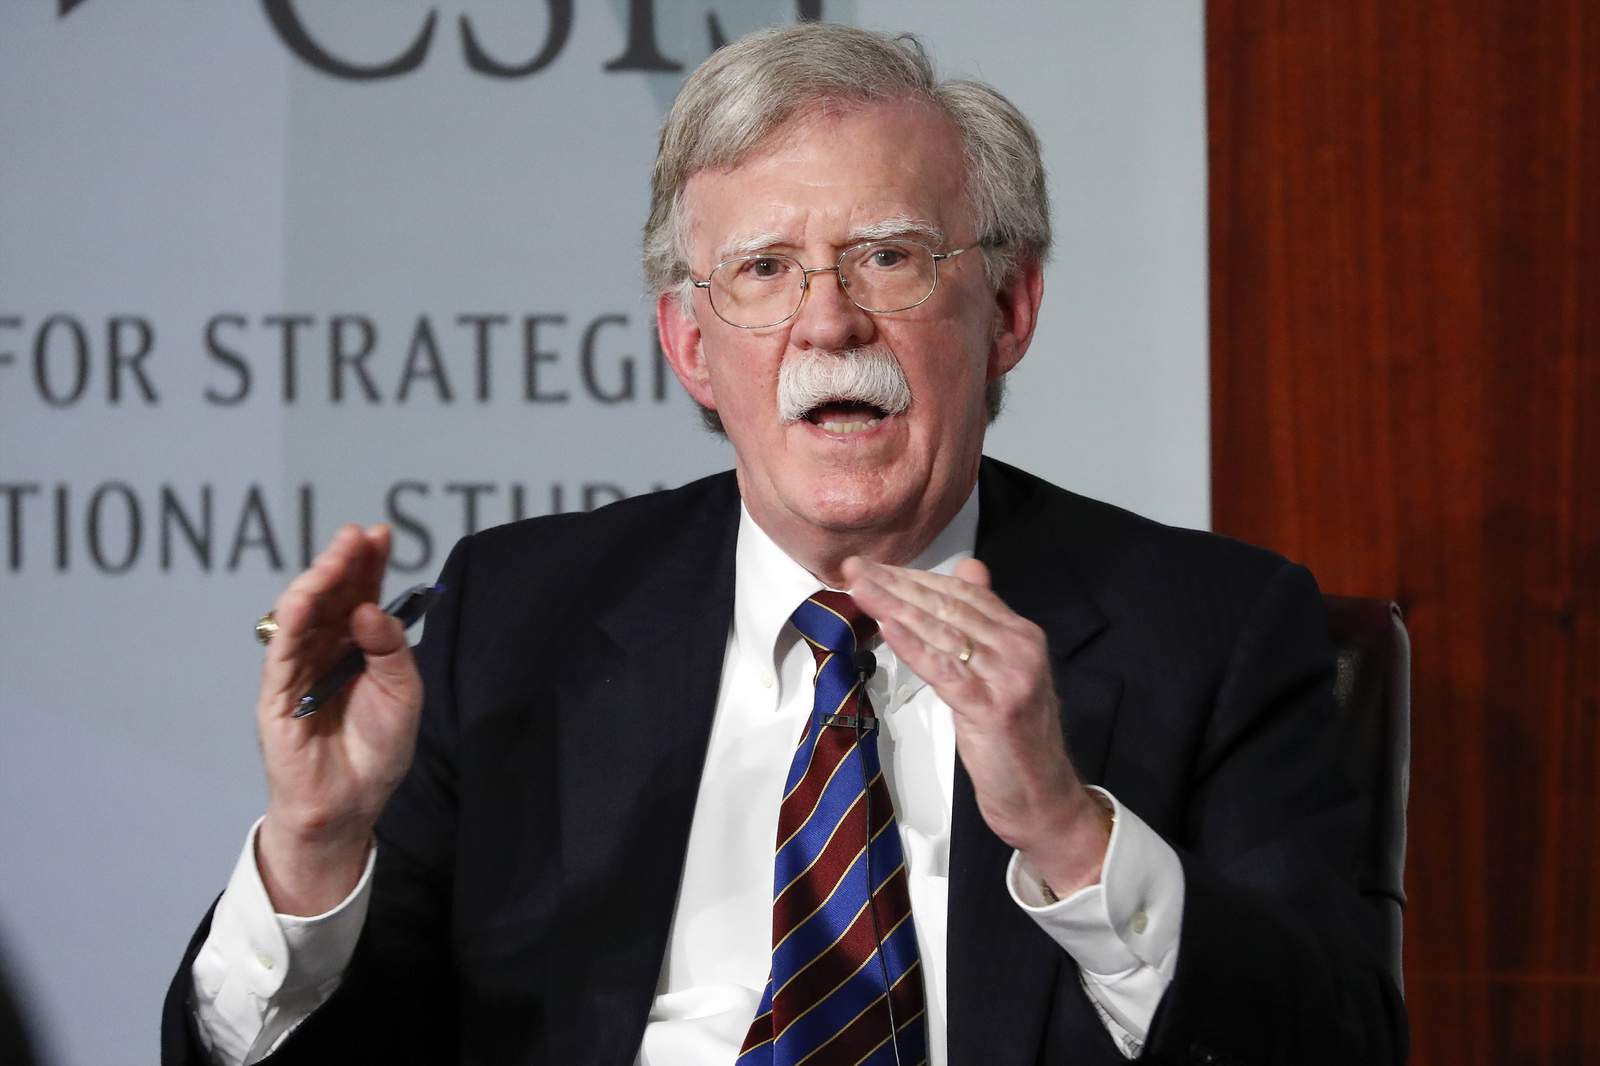 As Bolton speaks, Congress shrugs and points to election